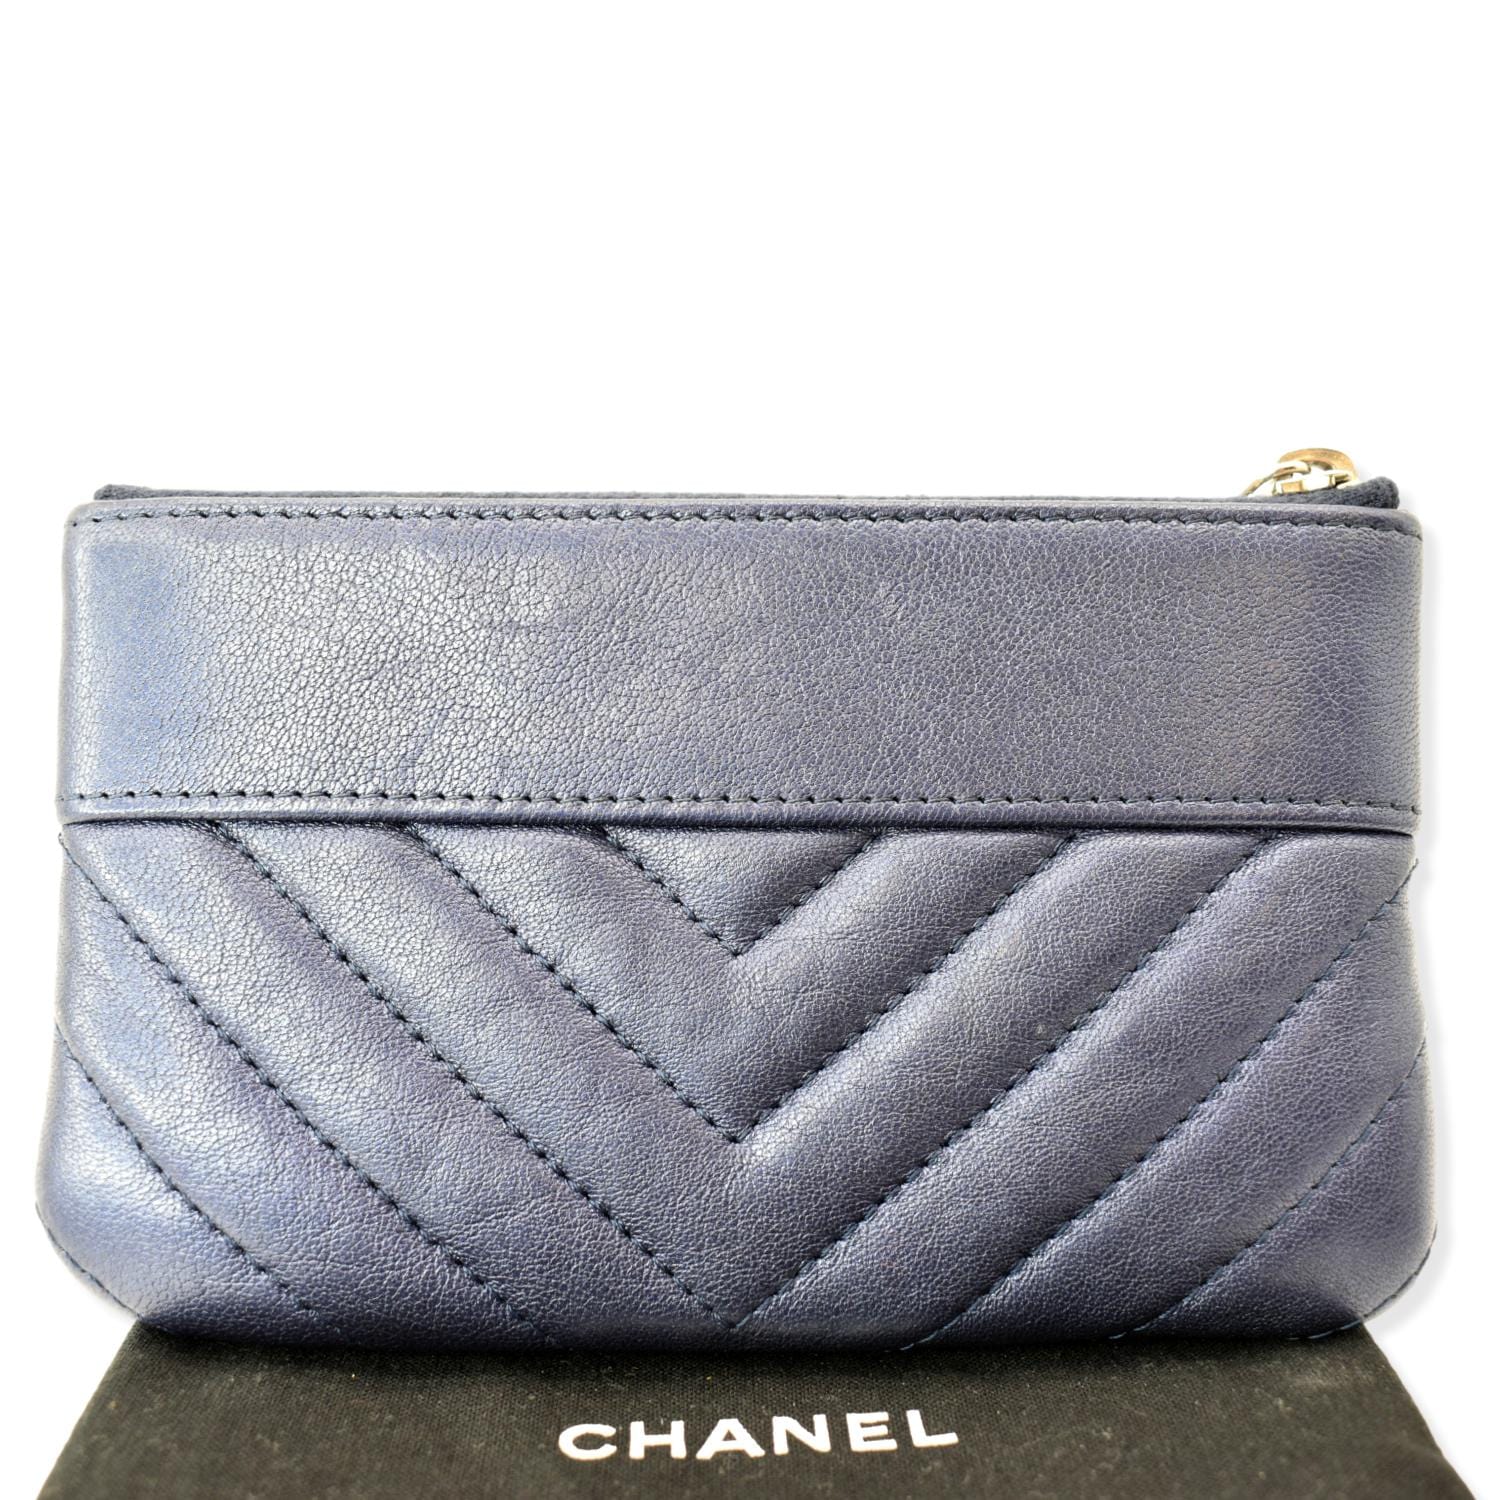 CHANEL, Bags, Chanel Pink Iridescent O Case